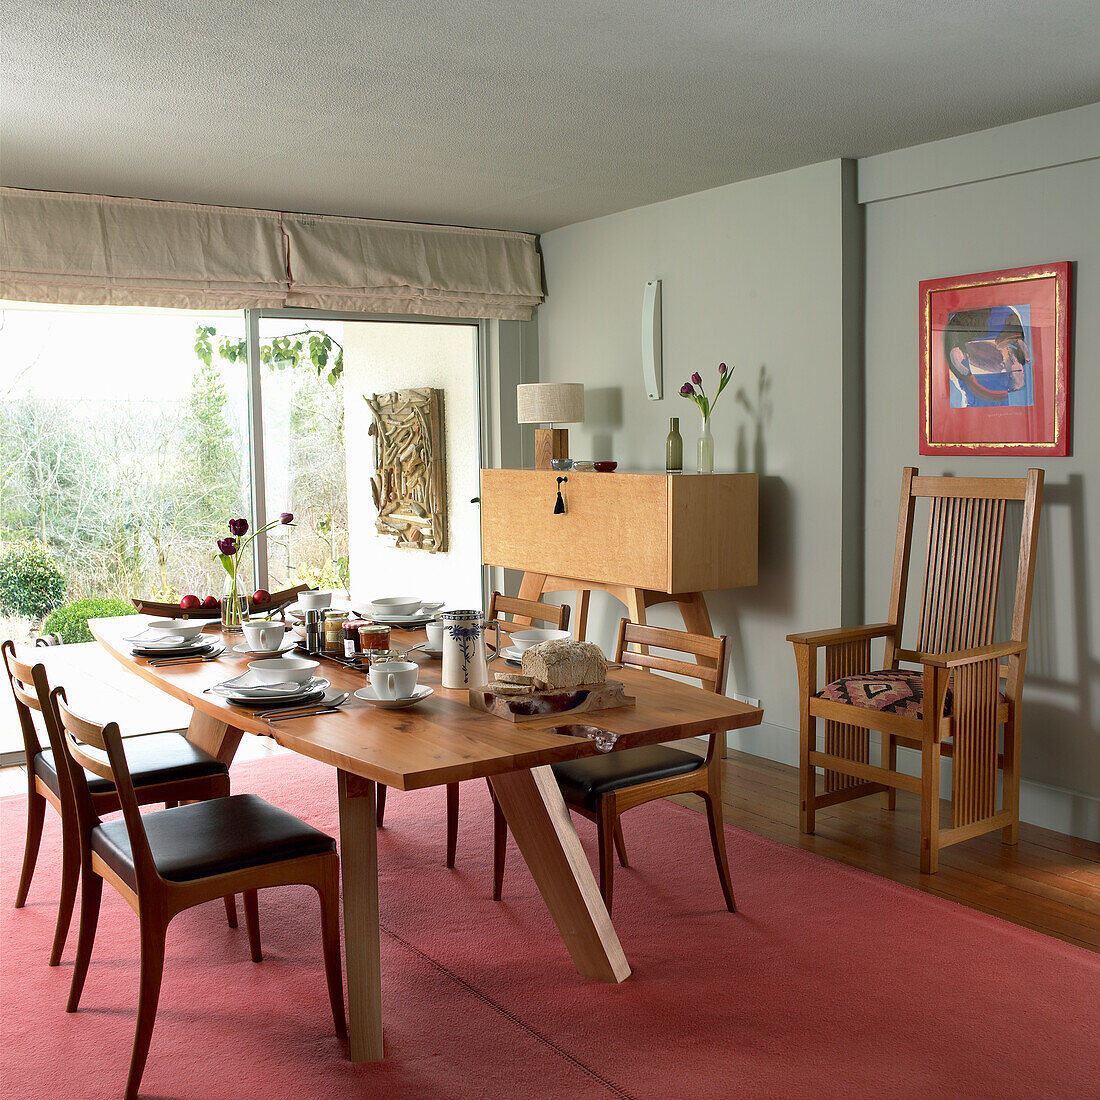 Dining room with wooden furniture and art on the wall